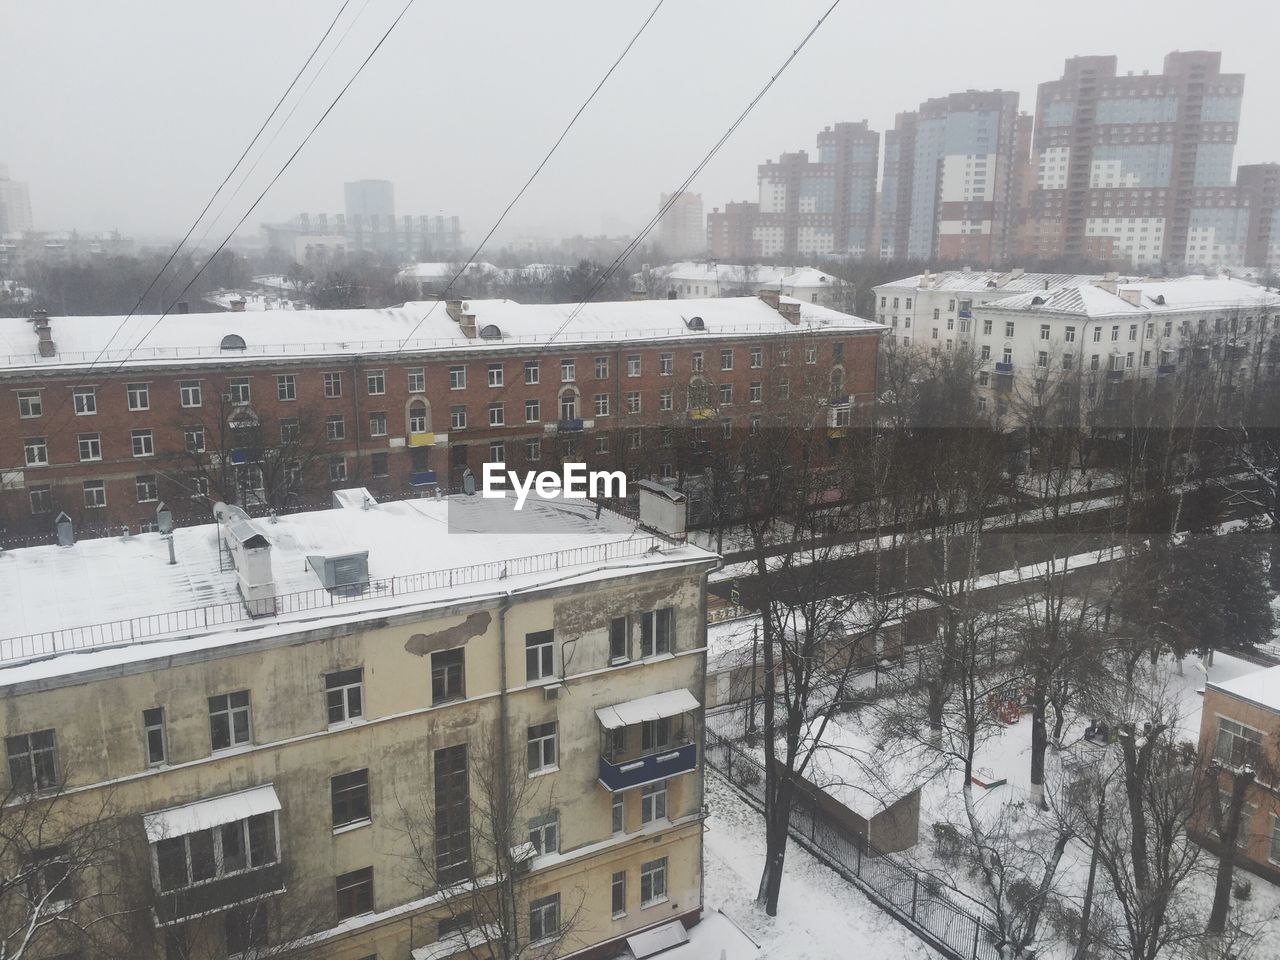 VIEW OF RESIDENTIAL DISTRICT IN WINTER